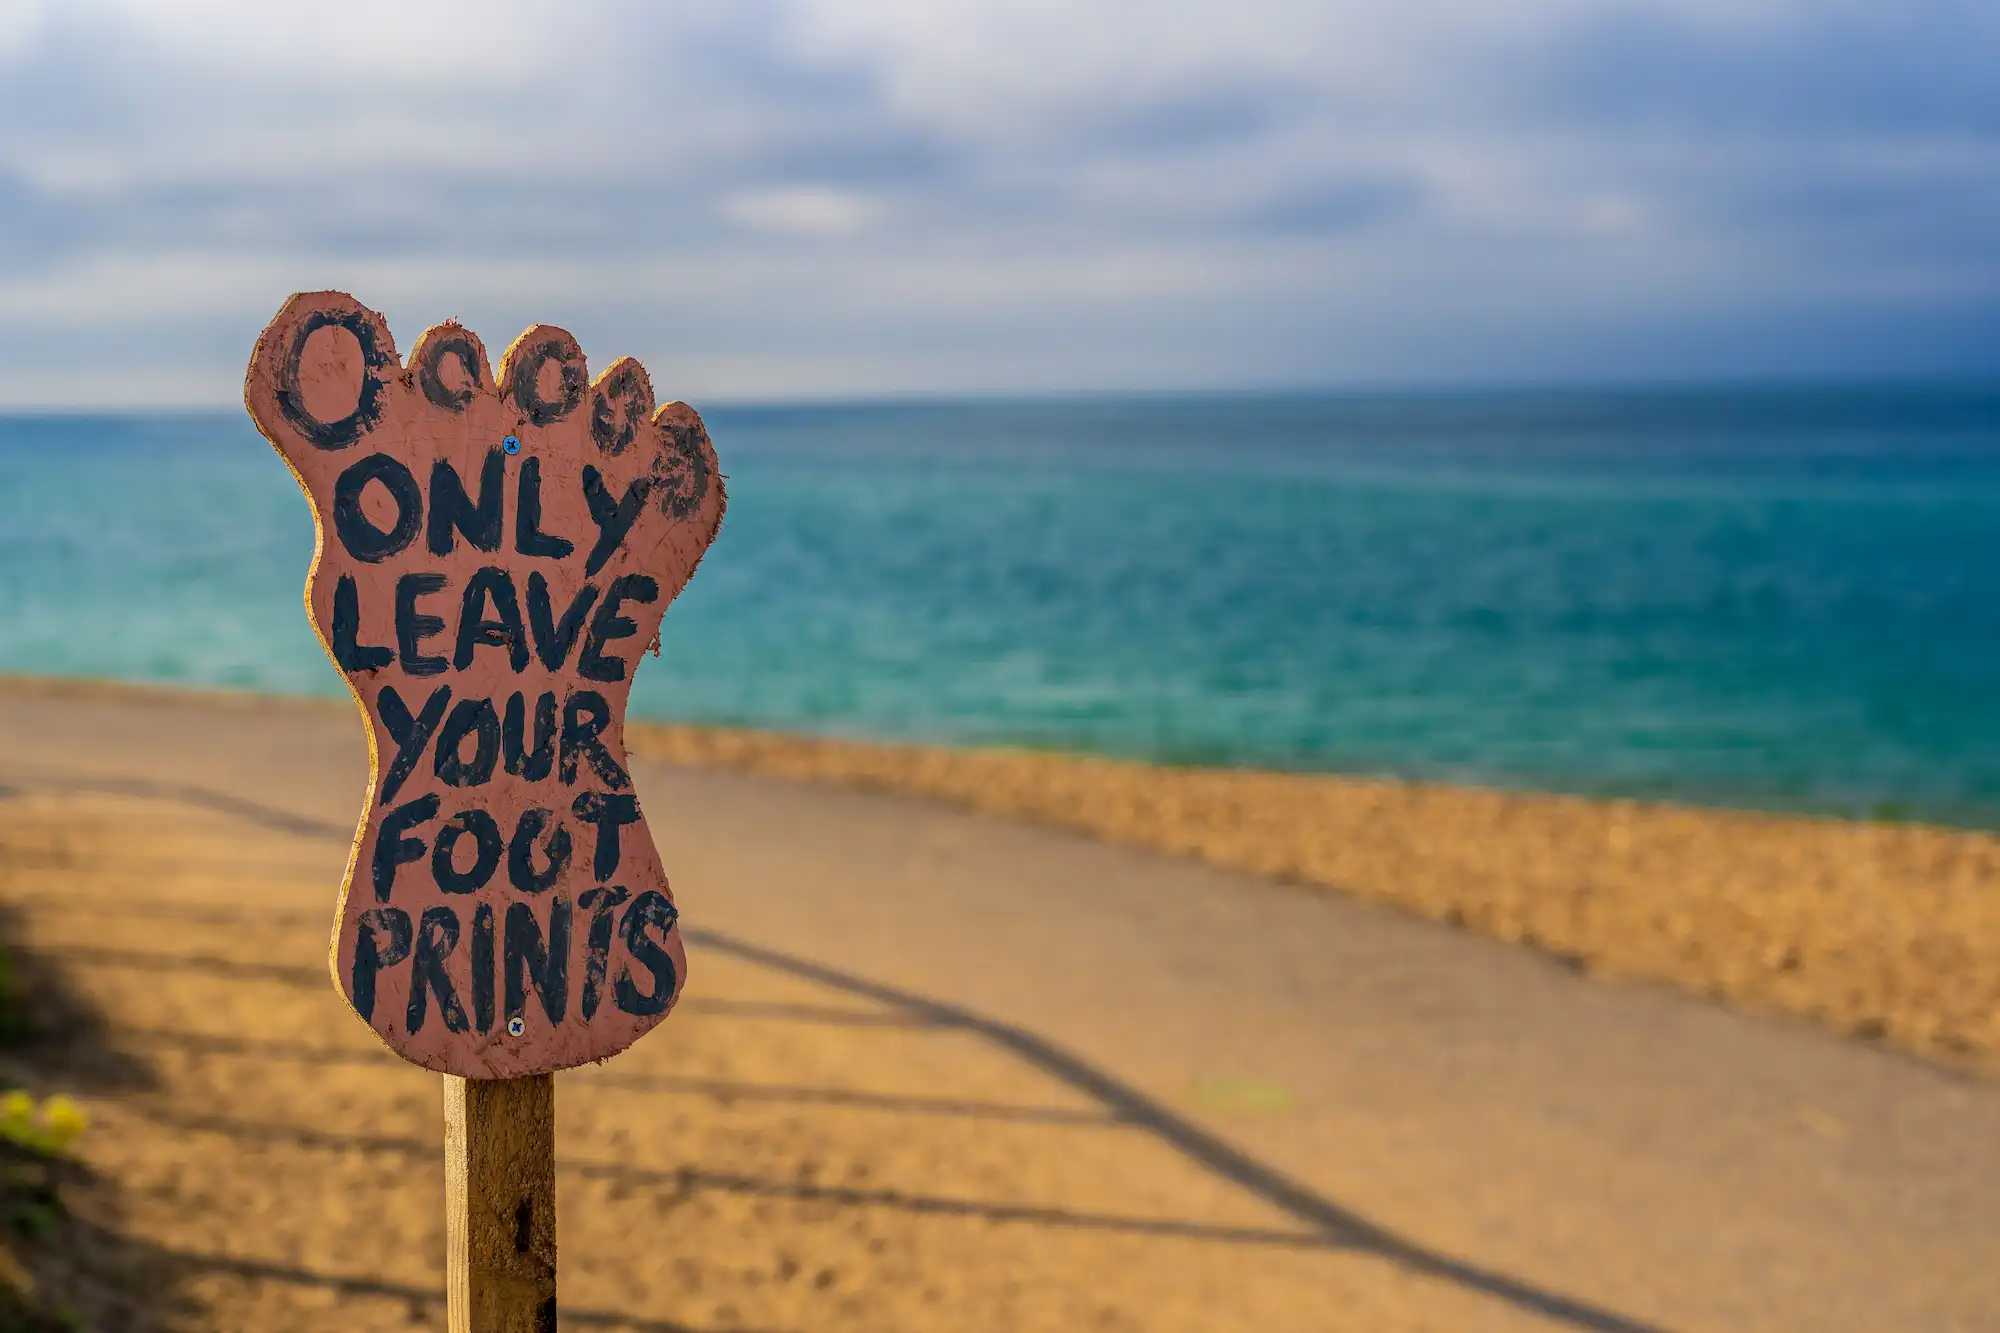 Only leave your footprint sign - Plage propre voyage écoresponsable